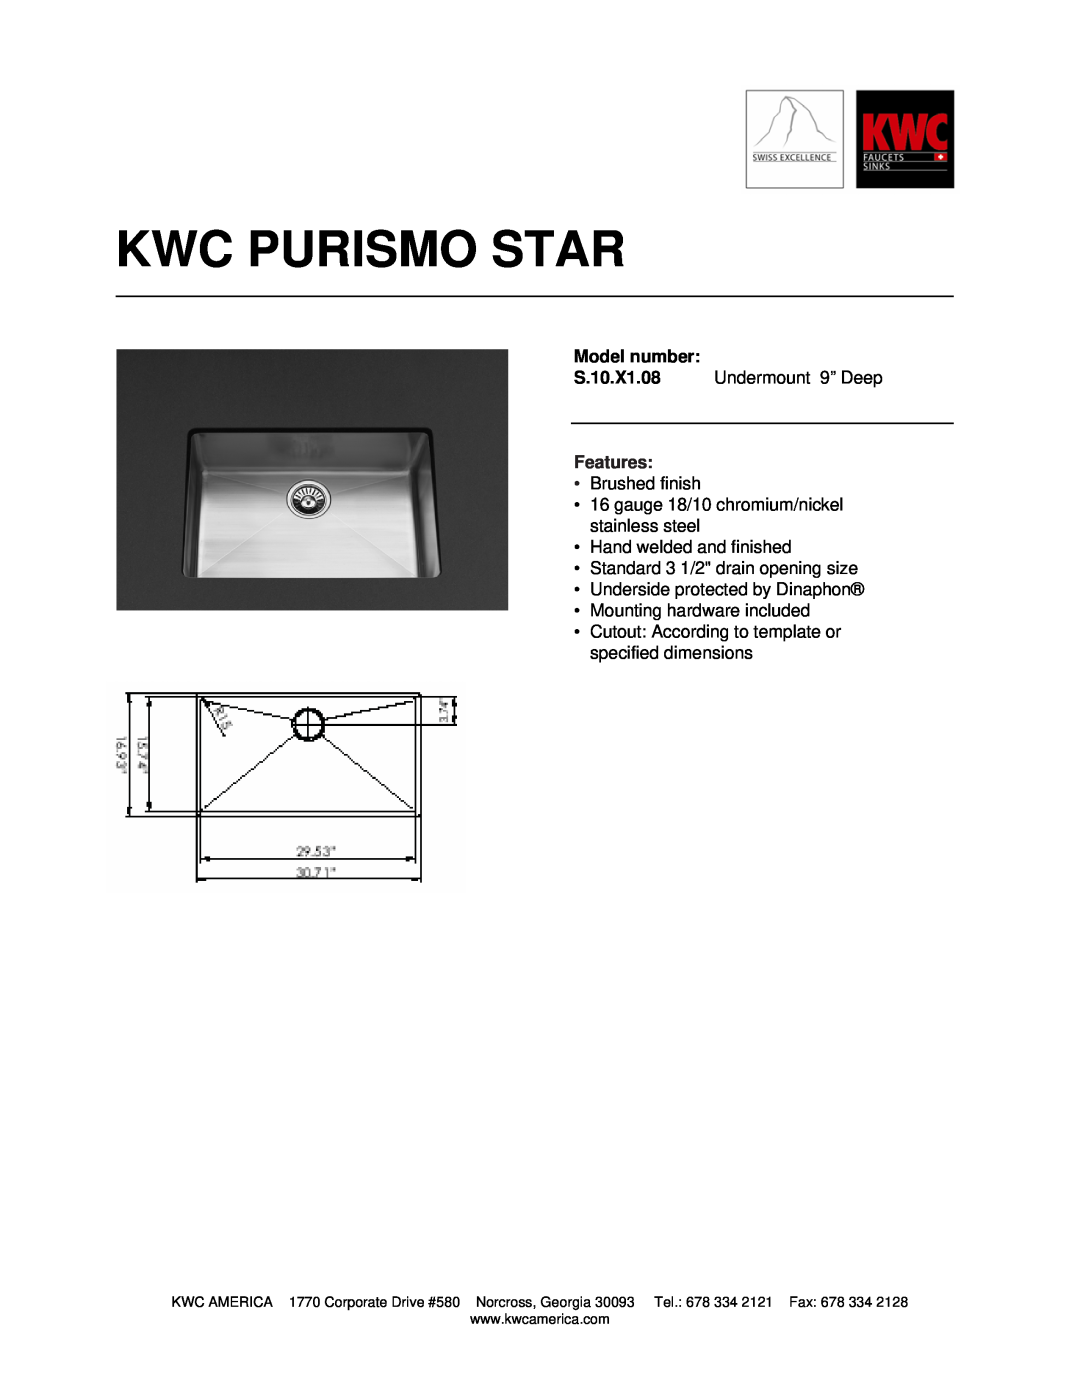 KWC S.10.X1.08 dimensions Kwc Purismo Star, Model number, Features 